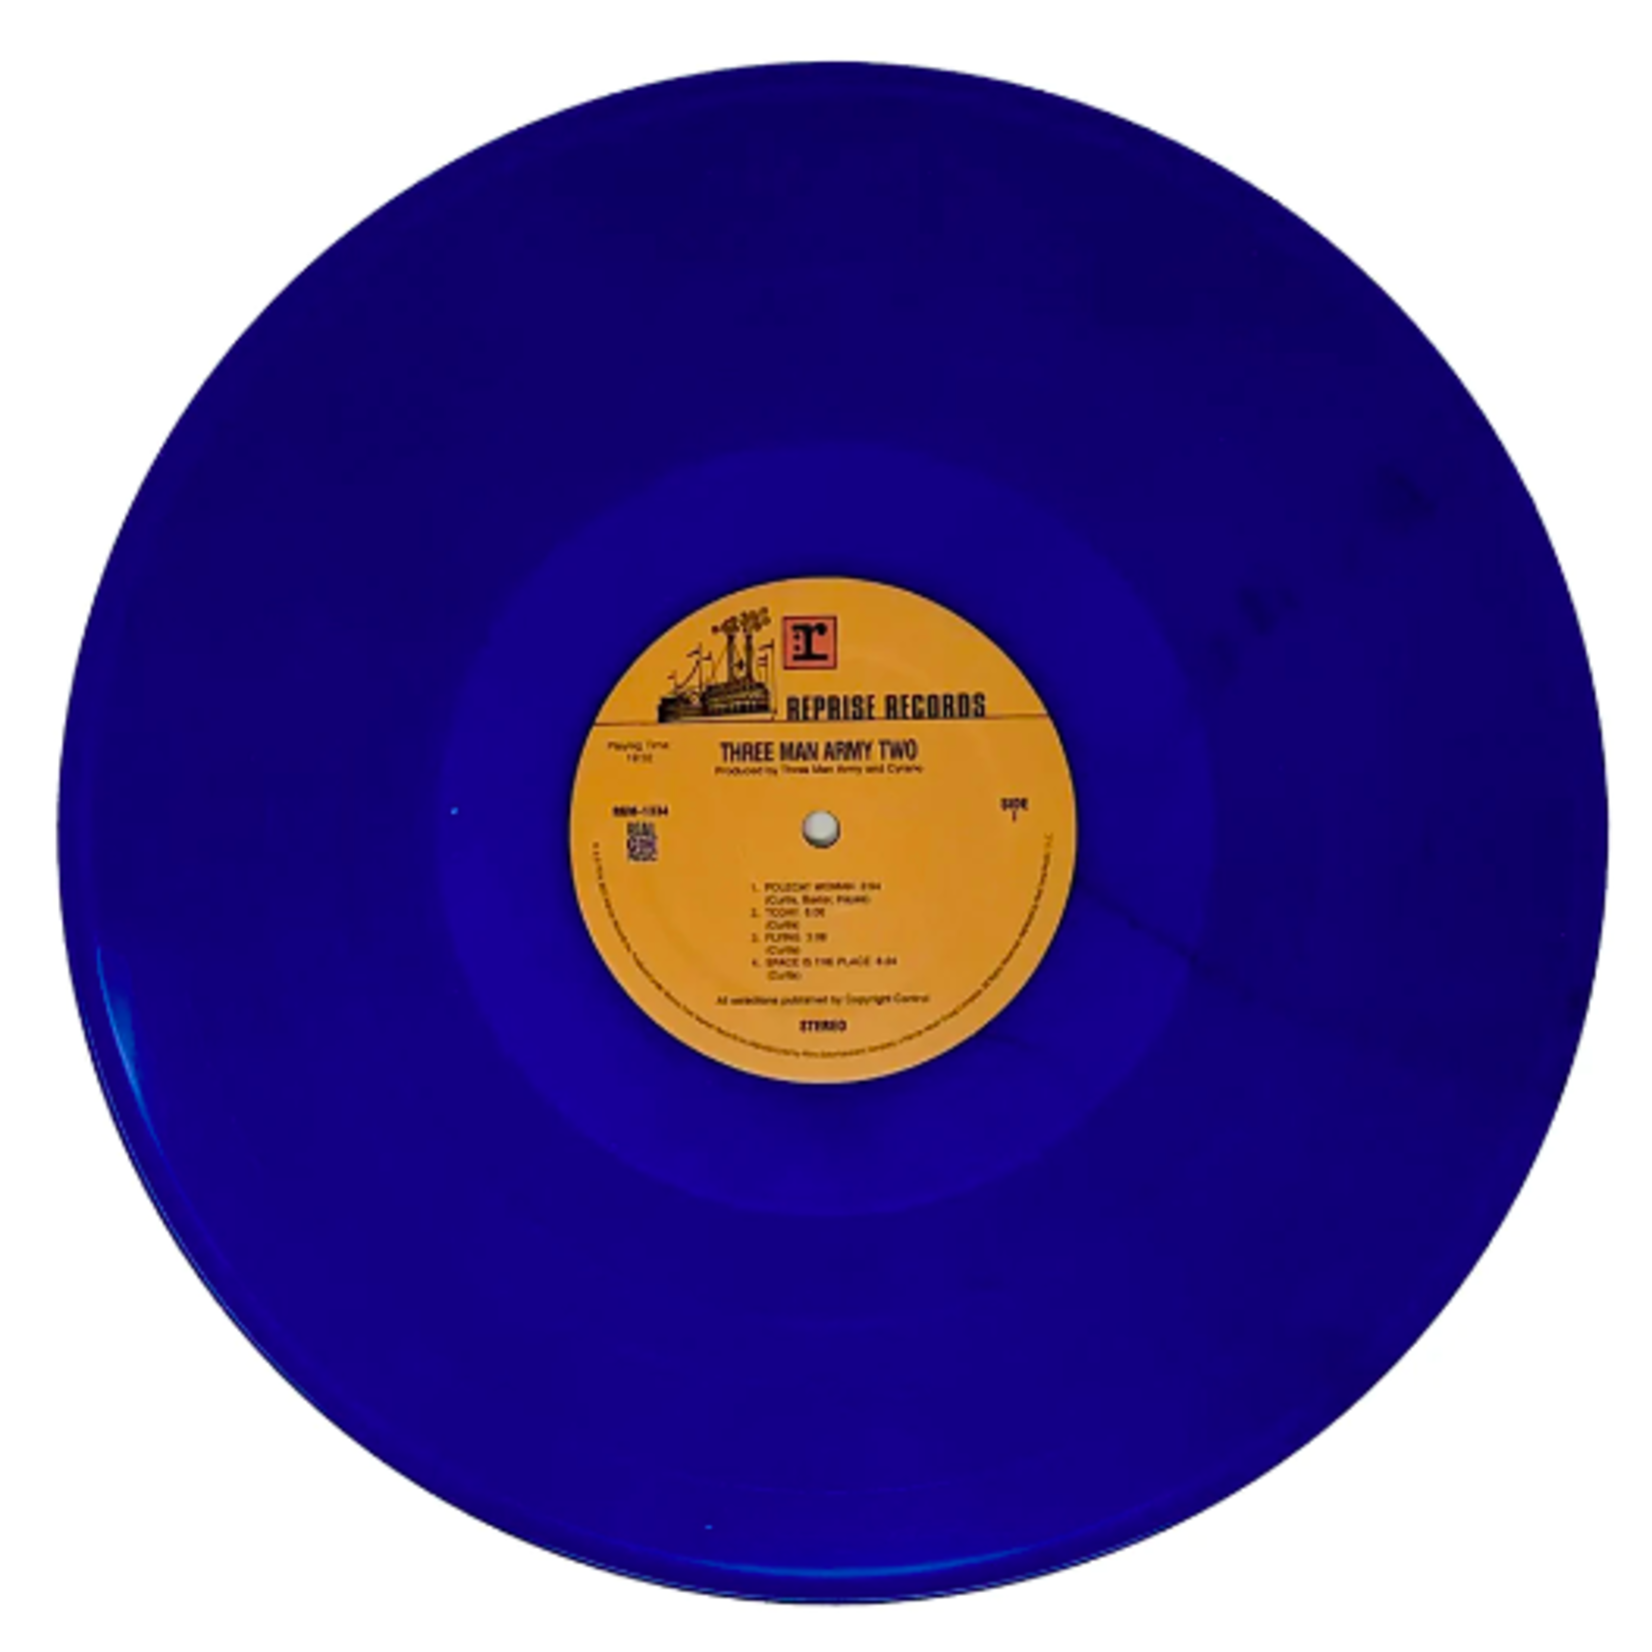 [New] Three Man Army: Two (cobalt blue vinyl) [REAL GONE MUSIC]